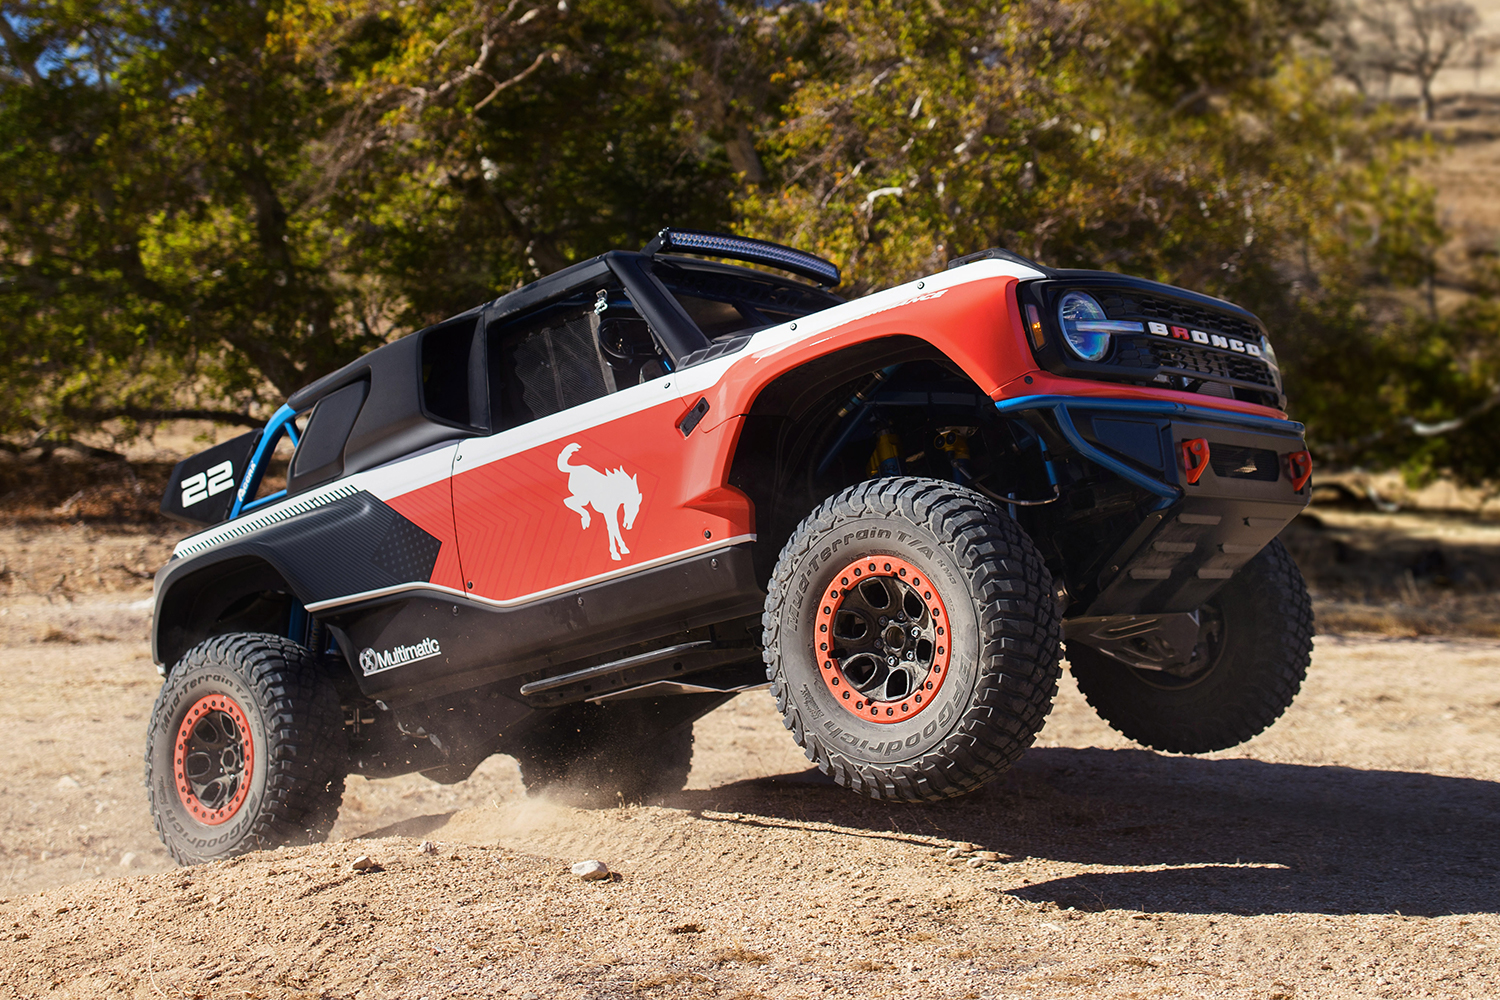 The new Ford Bronco DR, or Desert Racer, getting some airtime. The turnkey off-road racer was shown at SEMA 2021.